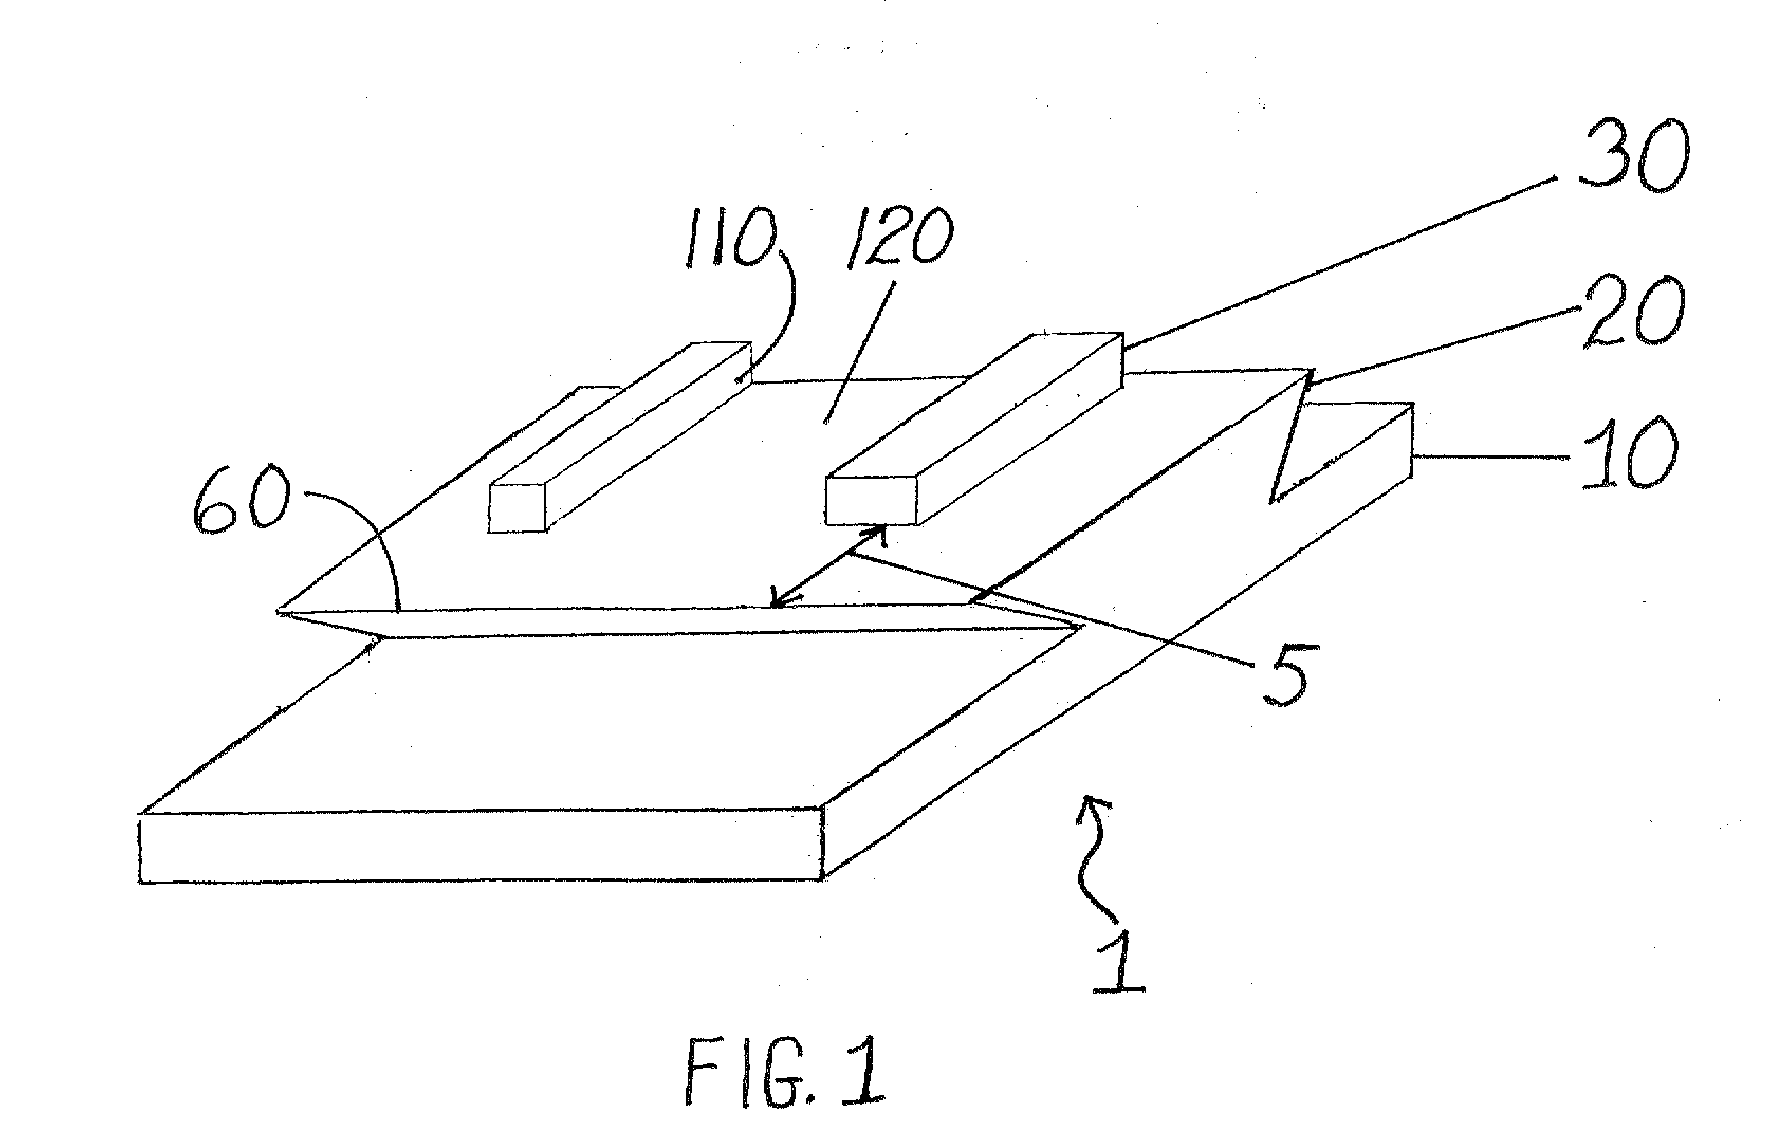 Method of Positioning Patterns from Block Copolymer Self-Assembly